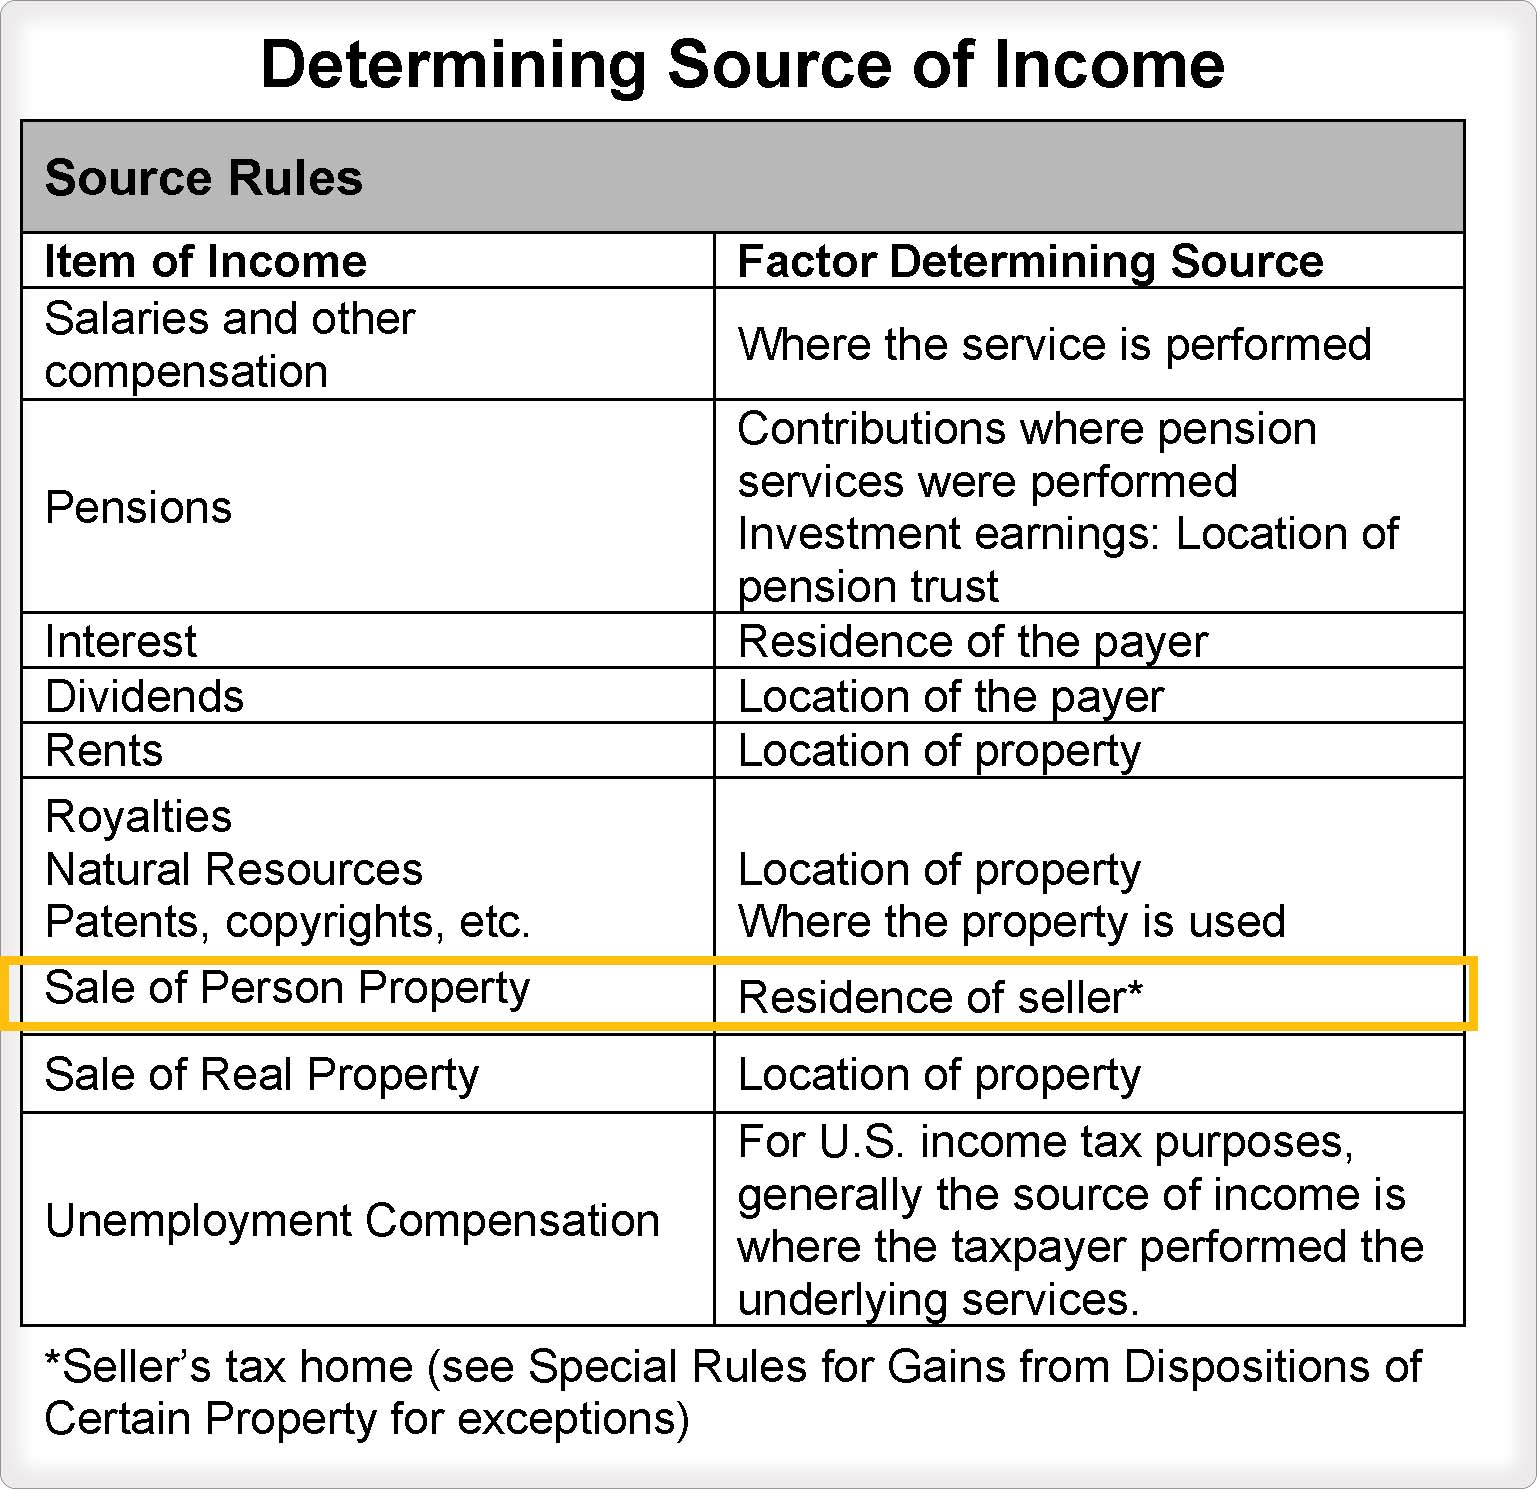 Source Rules table with sale of personal property row highlighted.